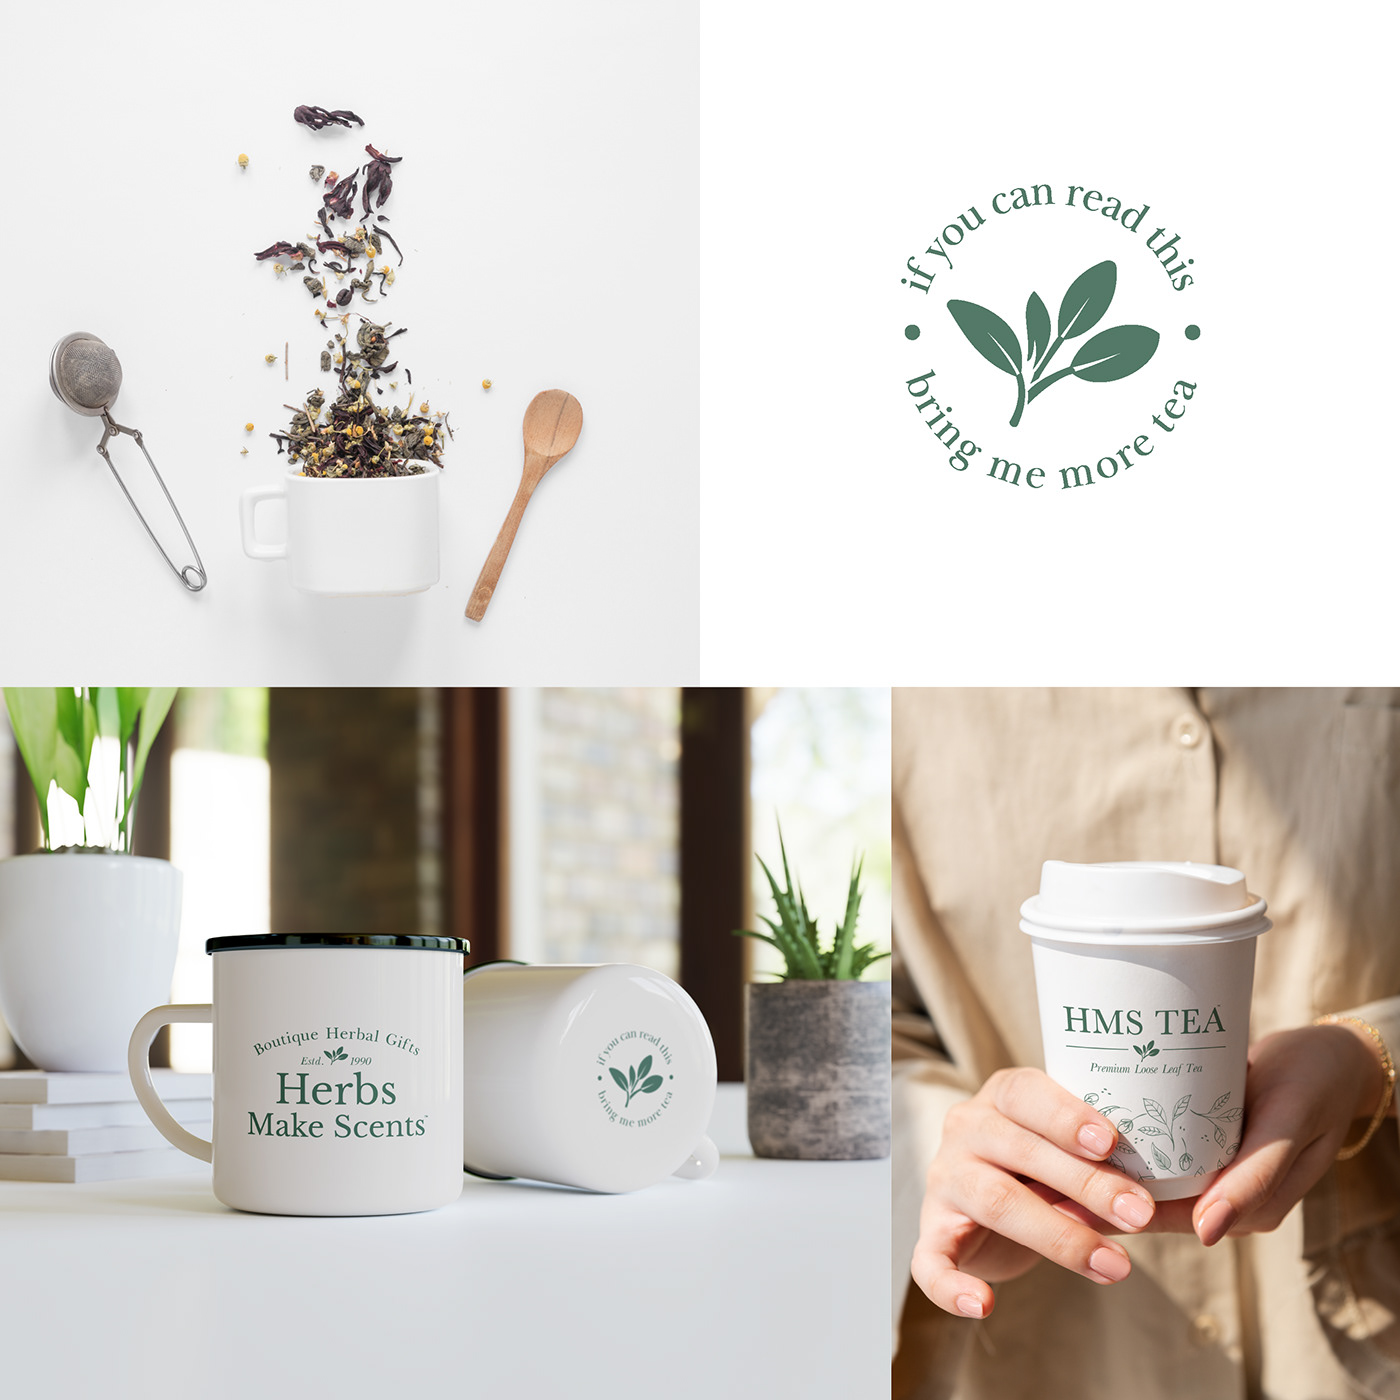 brand brand expansion brand strategy branding  Gift Shop identity Small Business tea